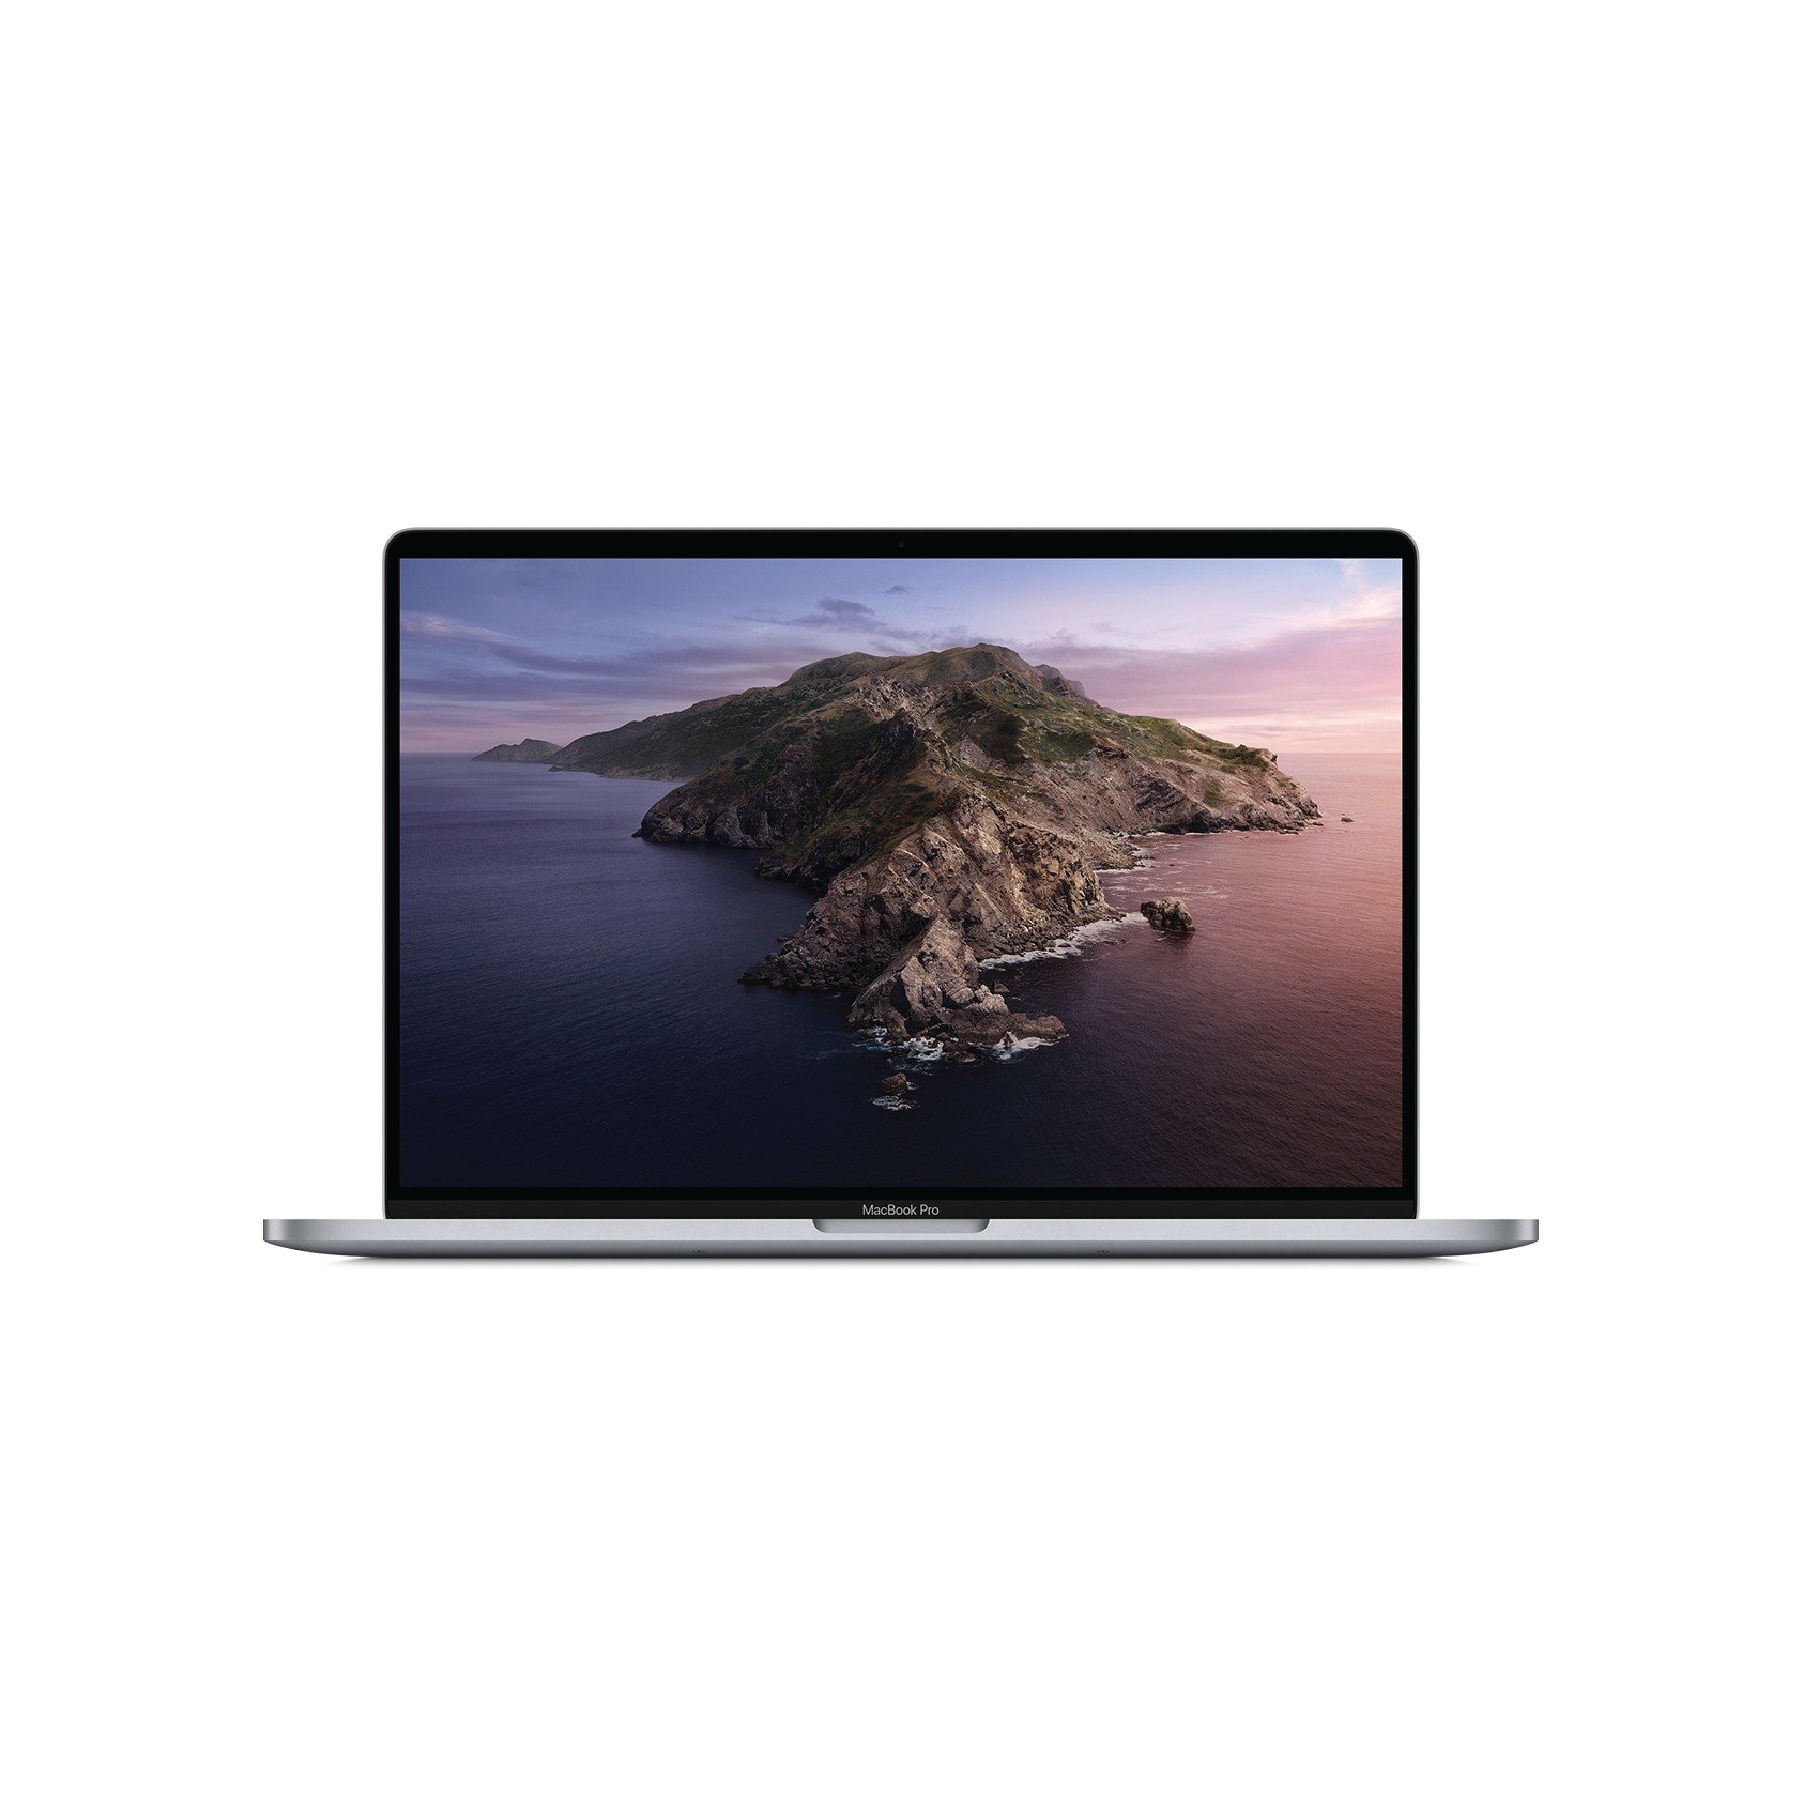 MacBook Pro (16-inch, 2019) 2.6GHz, Intel Core i7 512GB - Space Grey (Better) - iStore Pre-owned